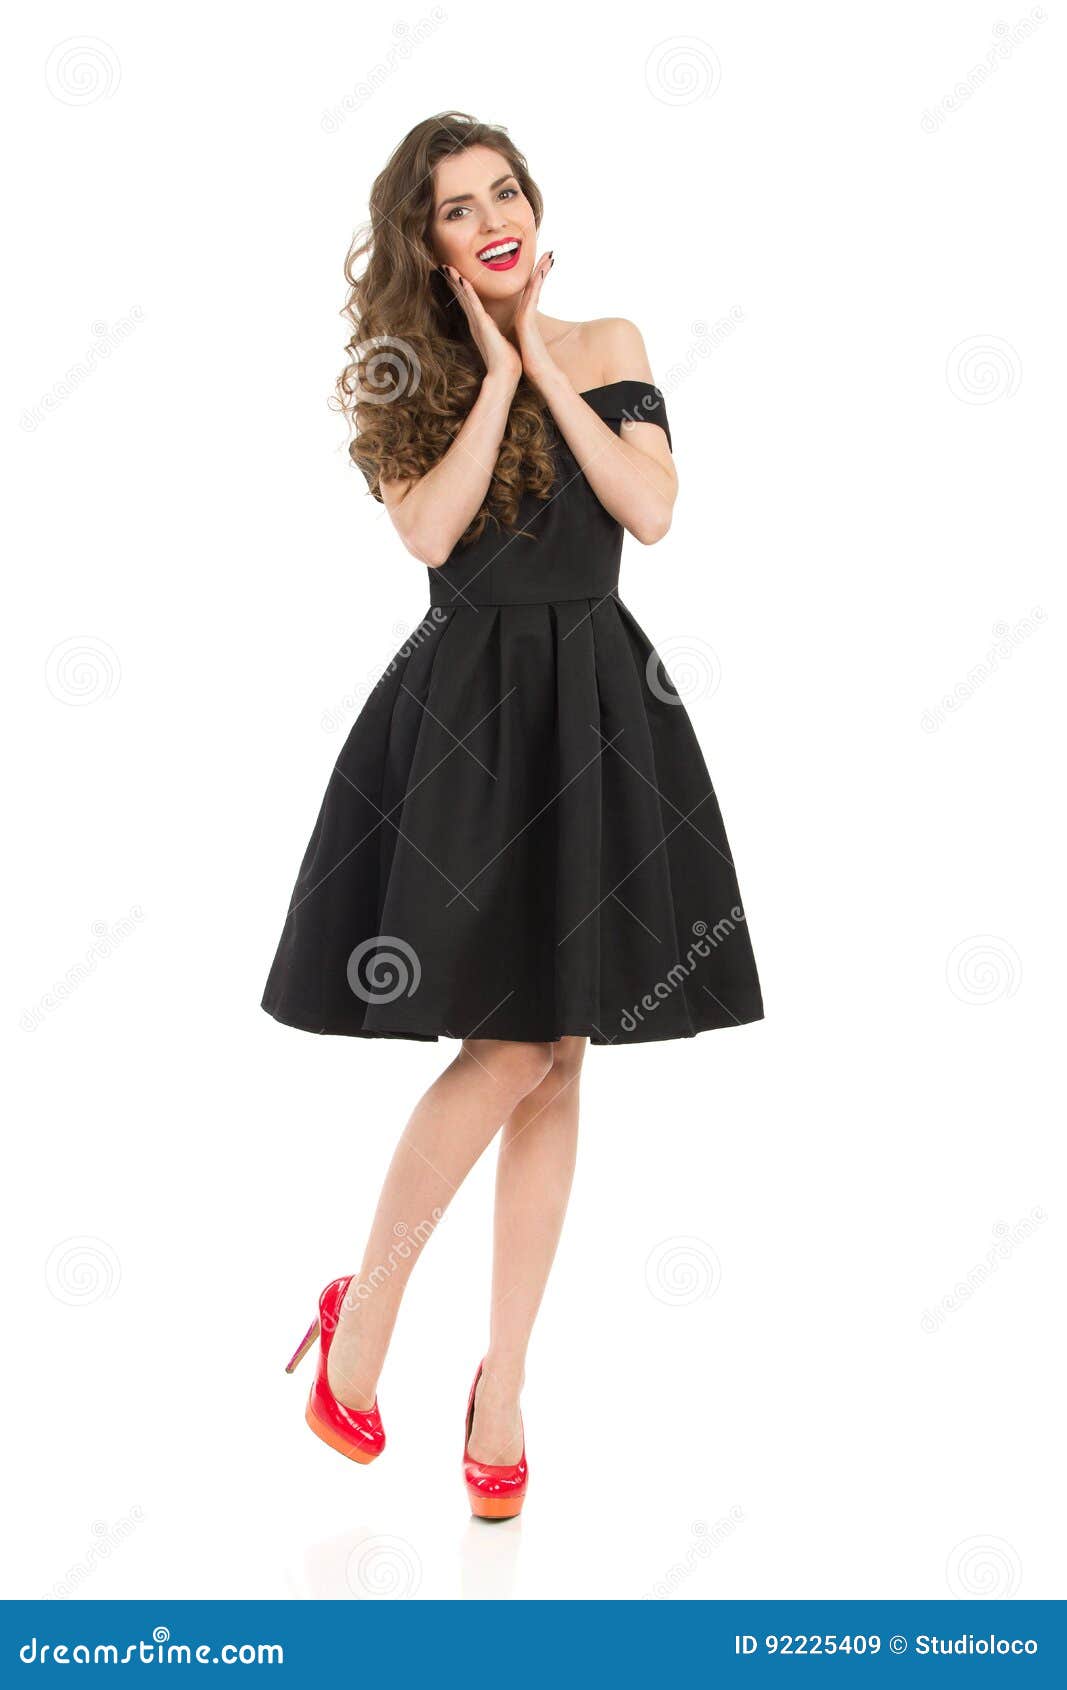 https://thumbs.dreamstime.com/z/delighted-elegant-woman-black-dress-red-high-heels-beautiful-young-cocktail-standing-one-leg-holding-head-hands-92225409.jpg